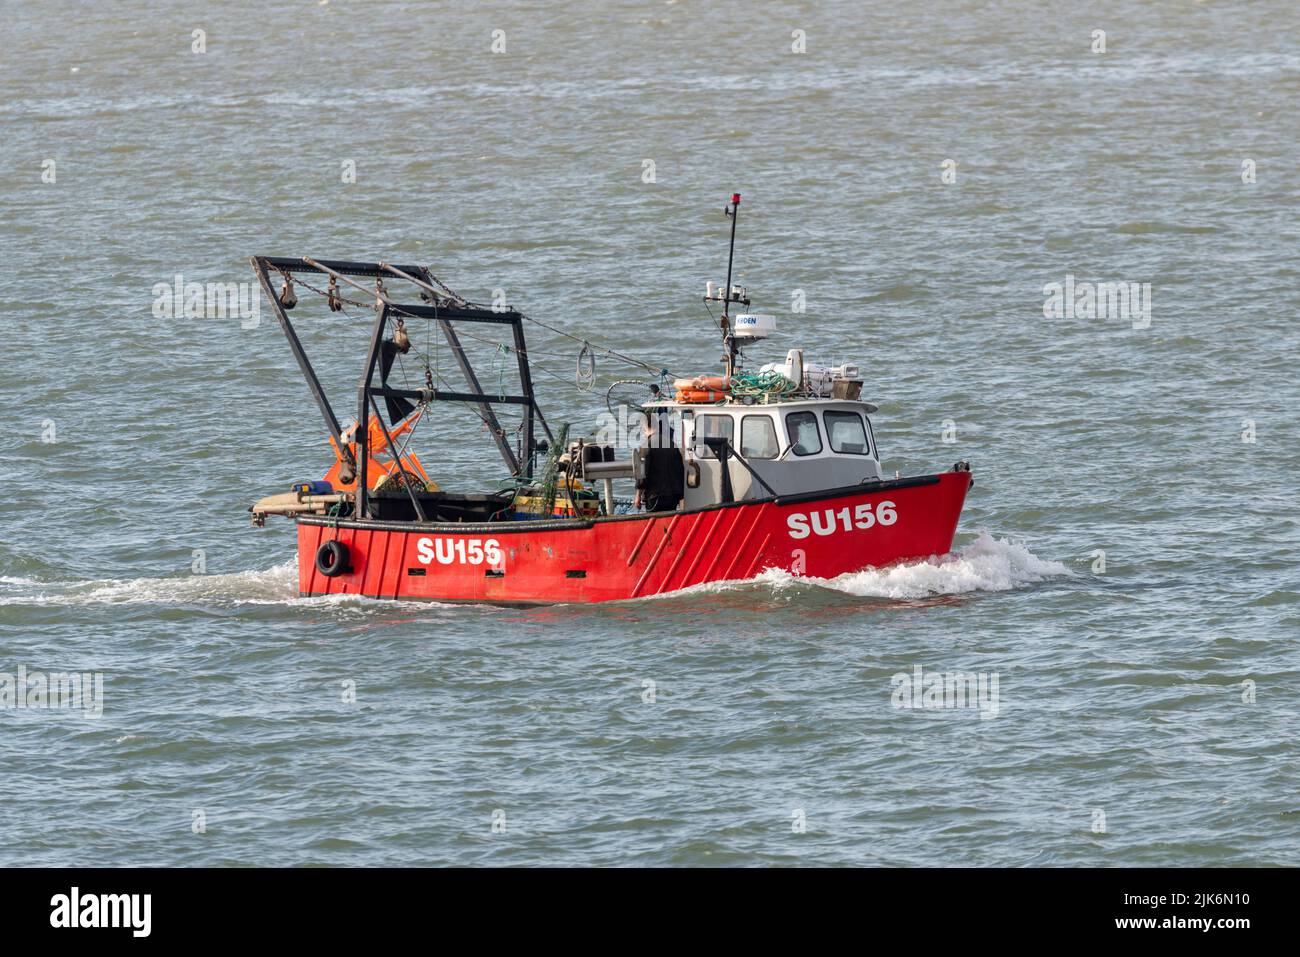 Fishing vessel SU156 Audacity coming in towards base at Leigh on Sea on the Thames Estuary, passing Southend on Sea, Essex, UK. Small working boat Stock Photo